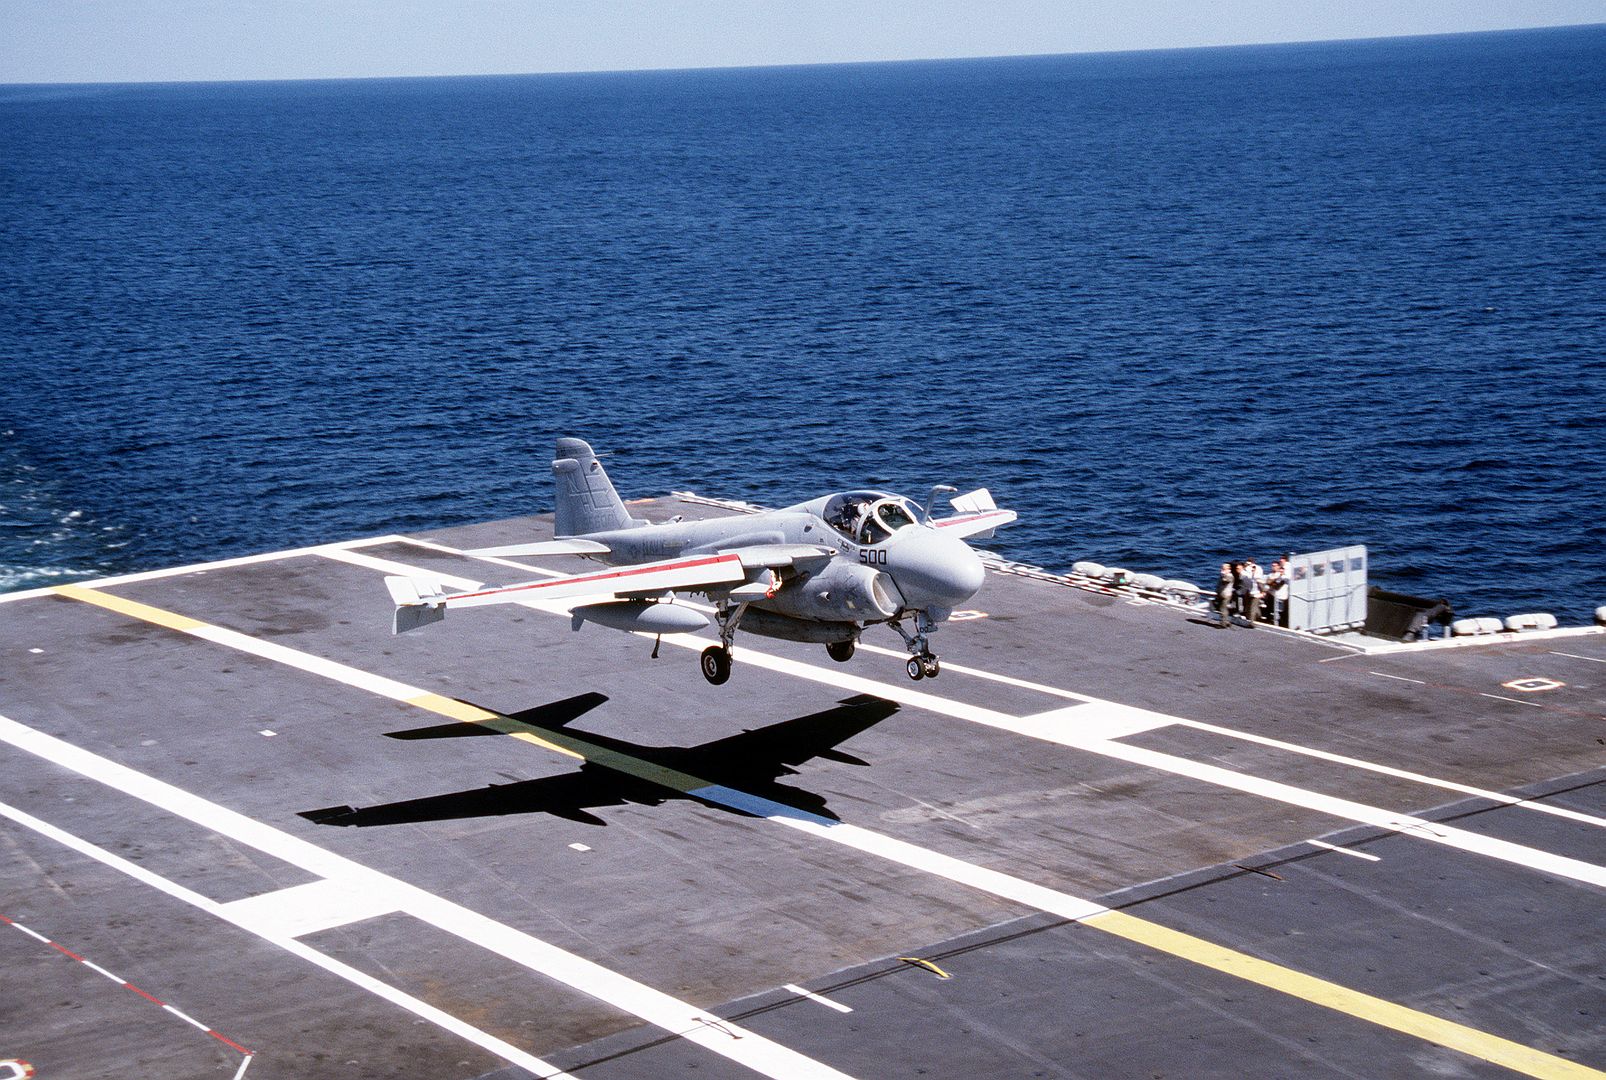 An Attack Squadron 95 A 6E Intruder Aircraft Comes In For A Landing On The Flight Deck Of The Nuclear Powered Aircraft Carrier USS ABRAHAM LINCOLN 3